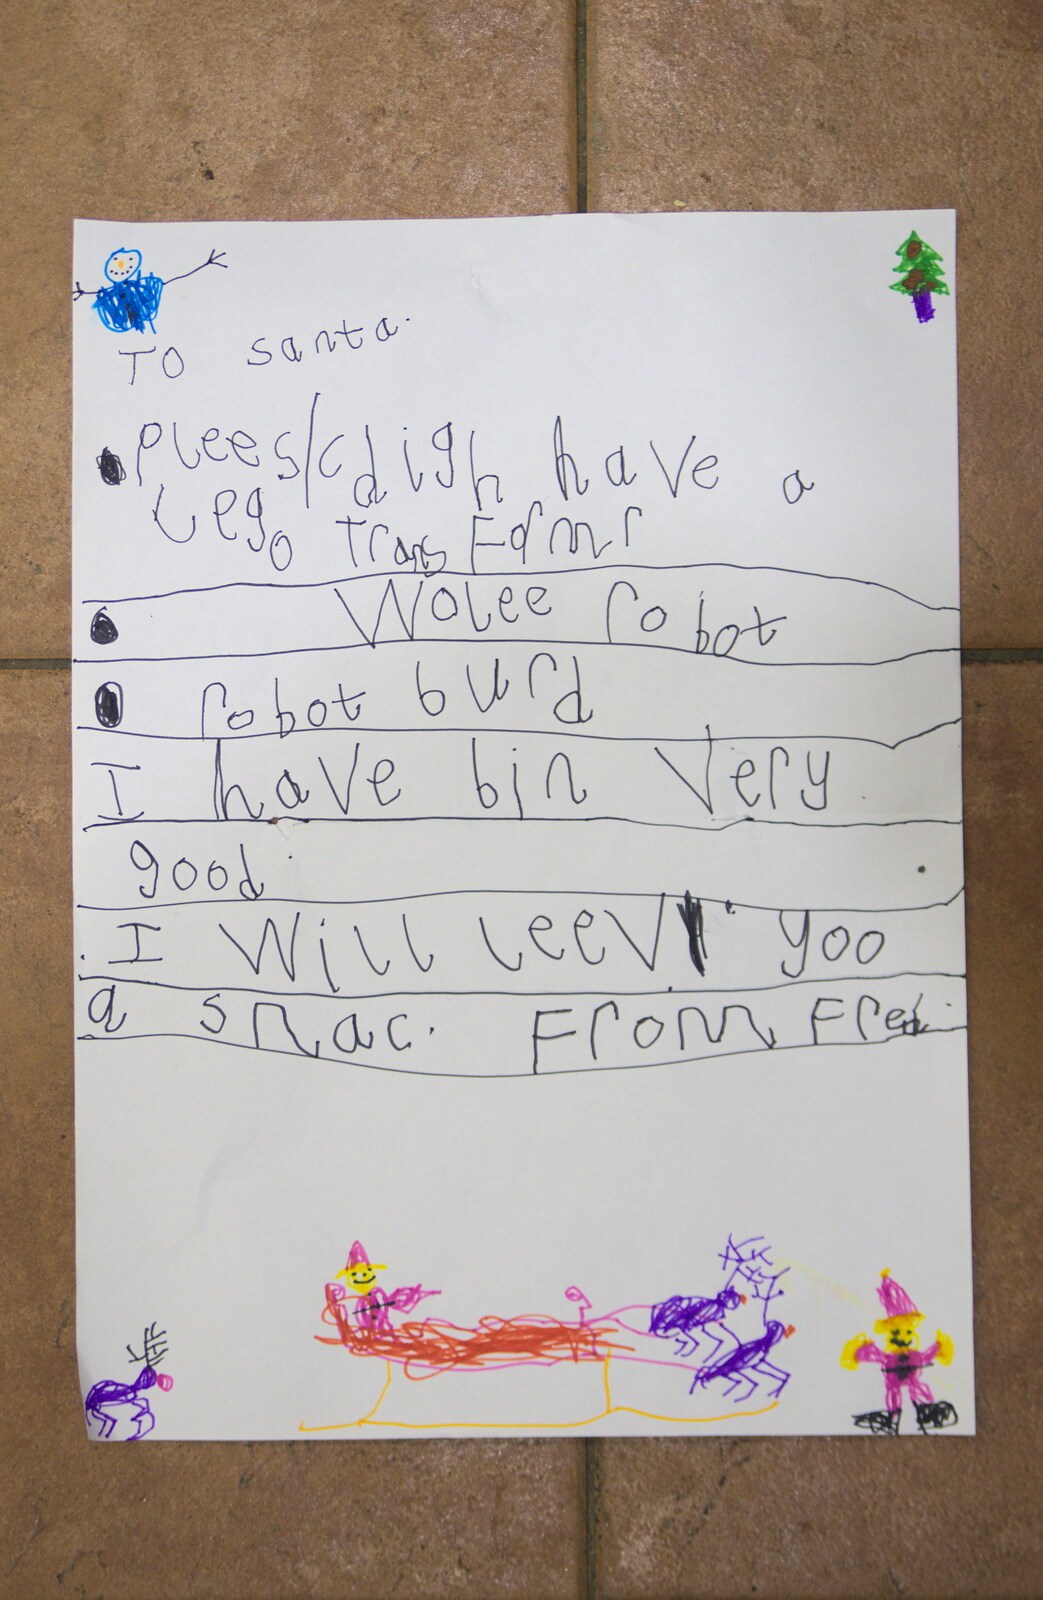 Fred's letter to Santa, including 'robot burd' from The Lorry-Eating Pavement of Diss, Norfolk - 3rd December